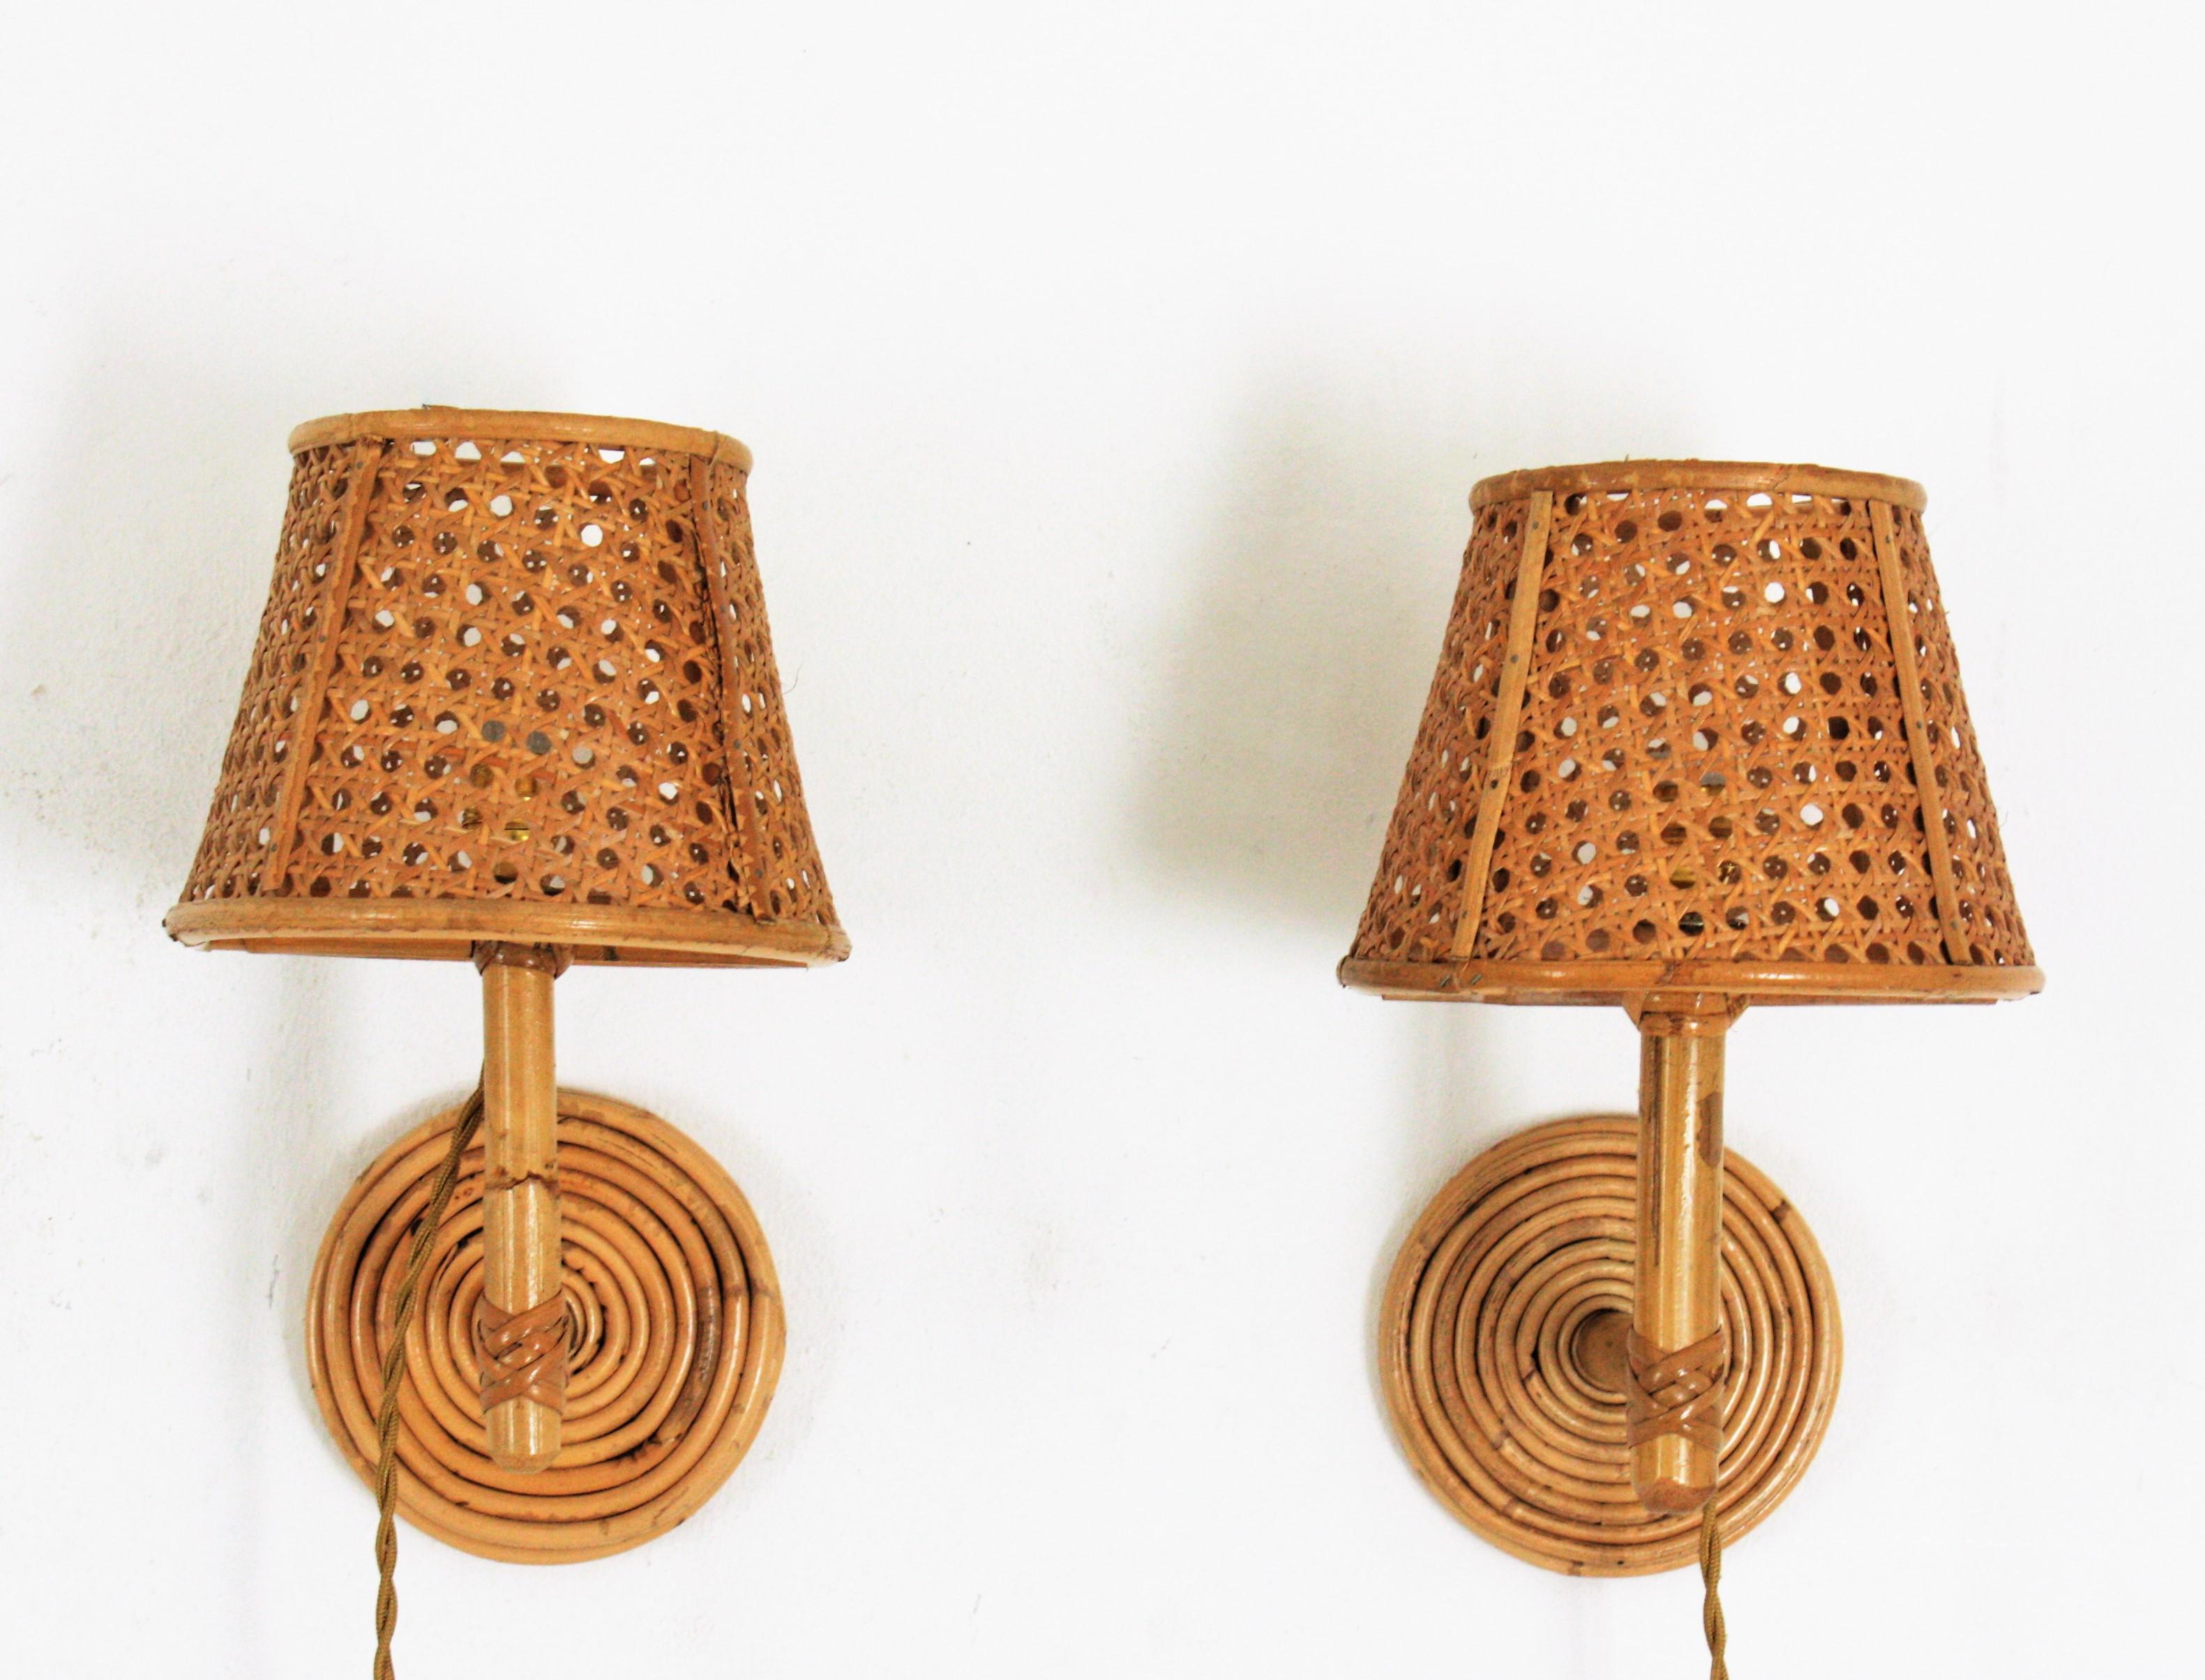 Eye-catching pair of Mid-Century Modern wicker and bamboo wall sconces with wicker weave shades: Italy, 1960s.
These wall lights feature round backplates covered with wicker holding bamboo arms with a wicker wire lampshades.
They will be the